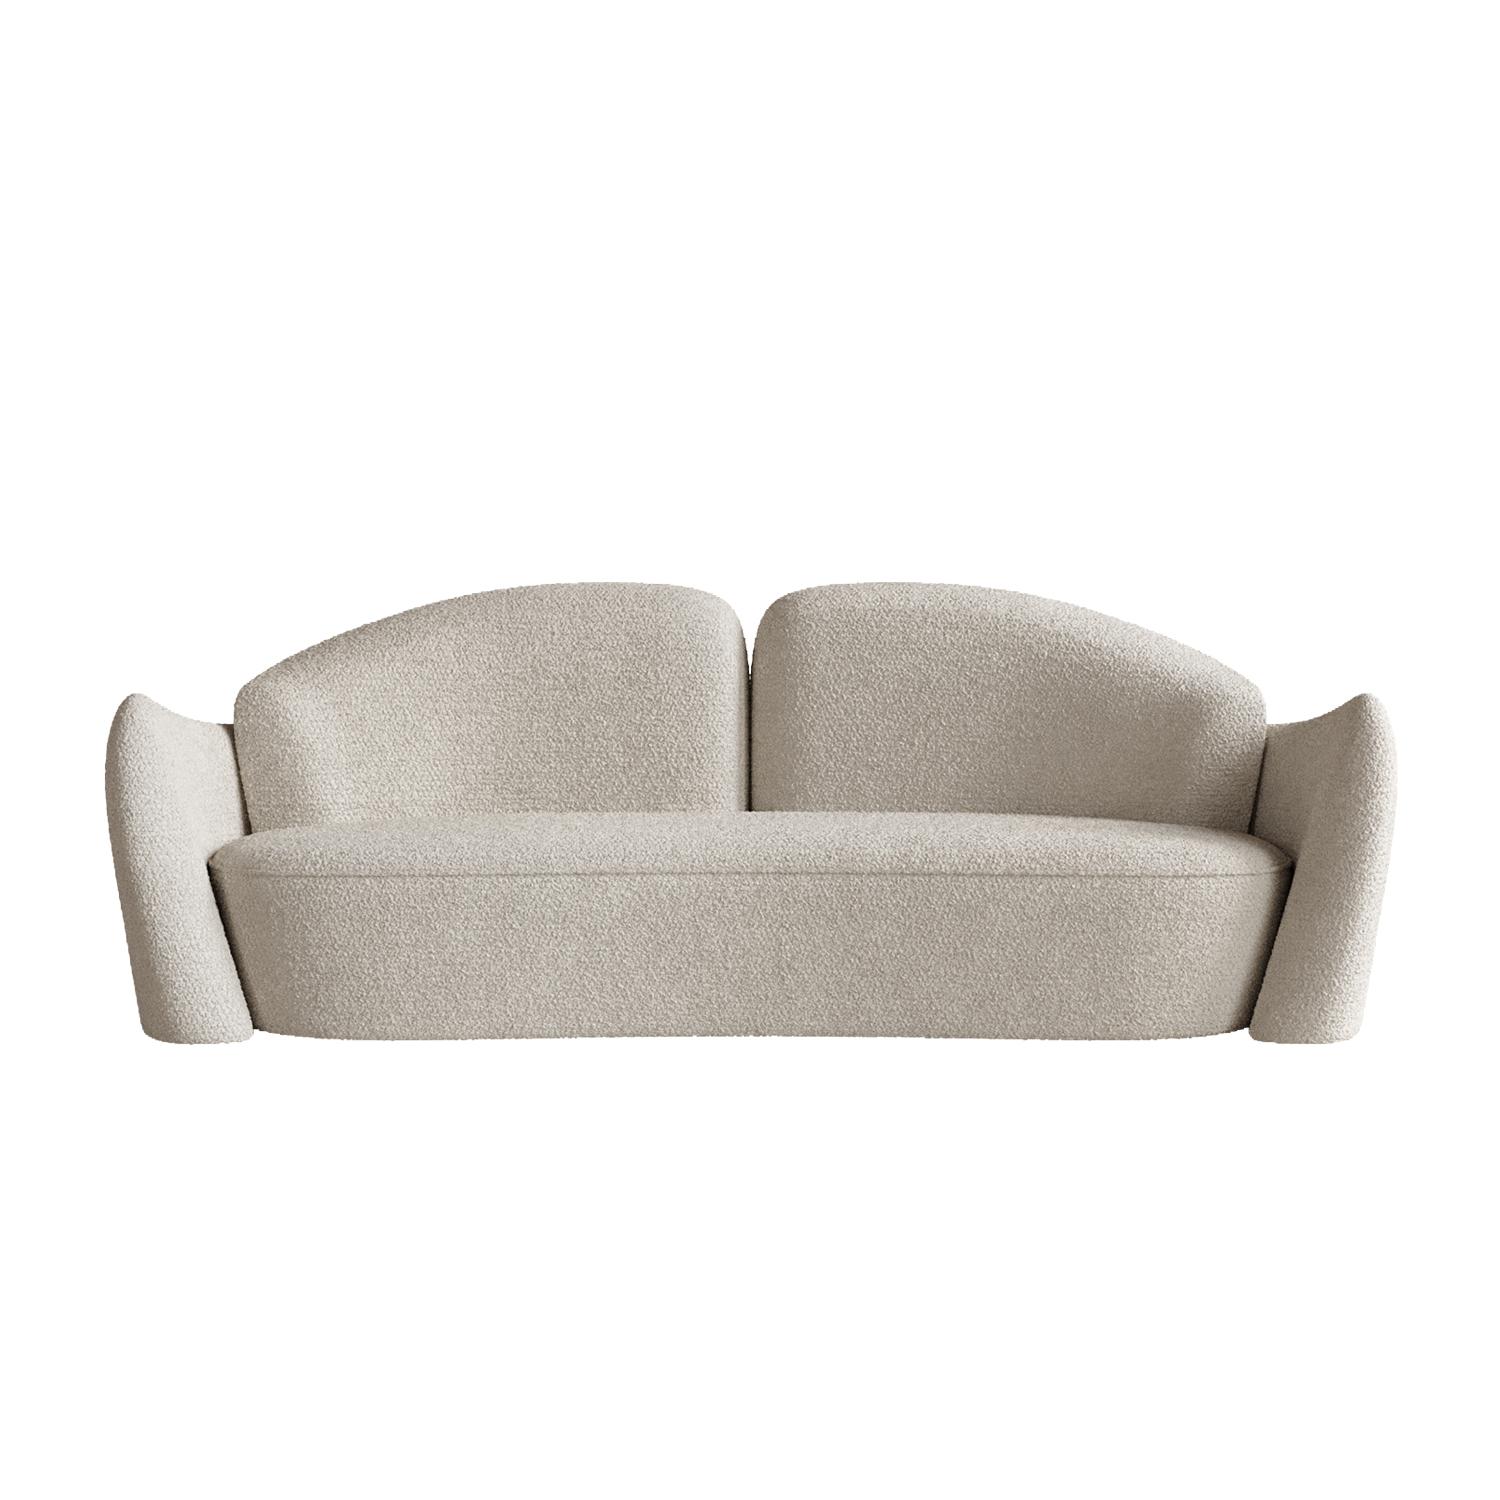 White Beige Memory Chair by Plyus Design
Dimensions: D 90 x W 240 x H 85 cm
Materials:  Wood, HR foam, polyester wadding, fabric upholstery

“Memory” sofa.
Collection 